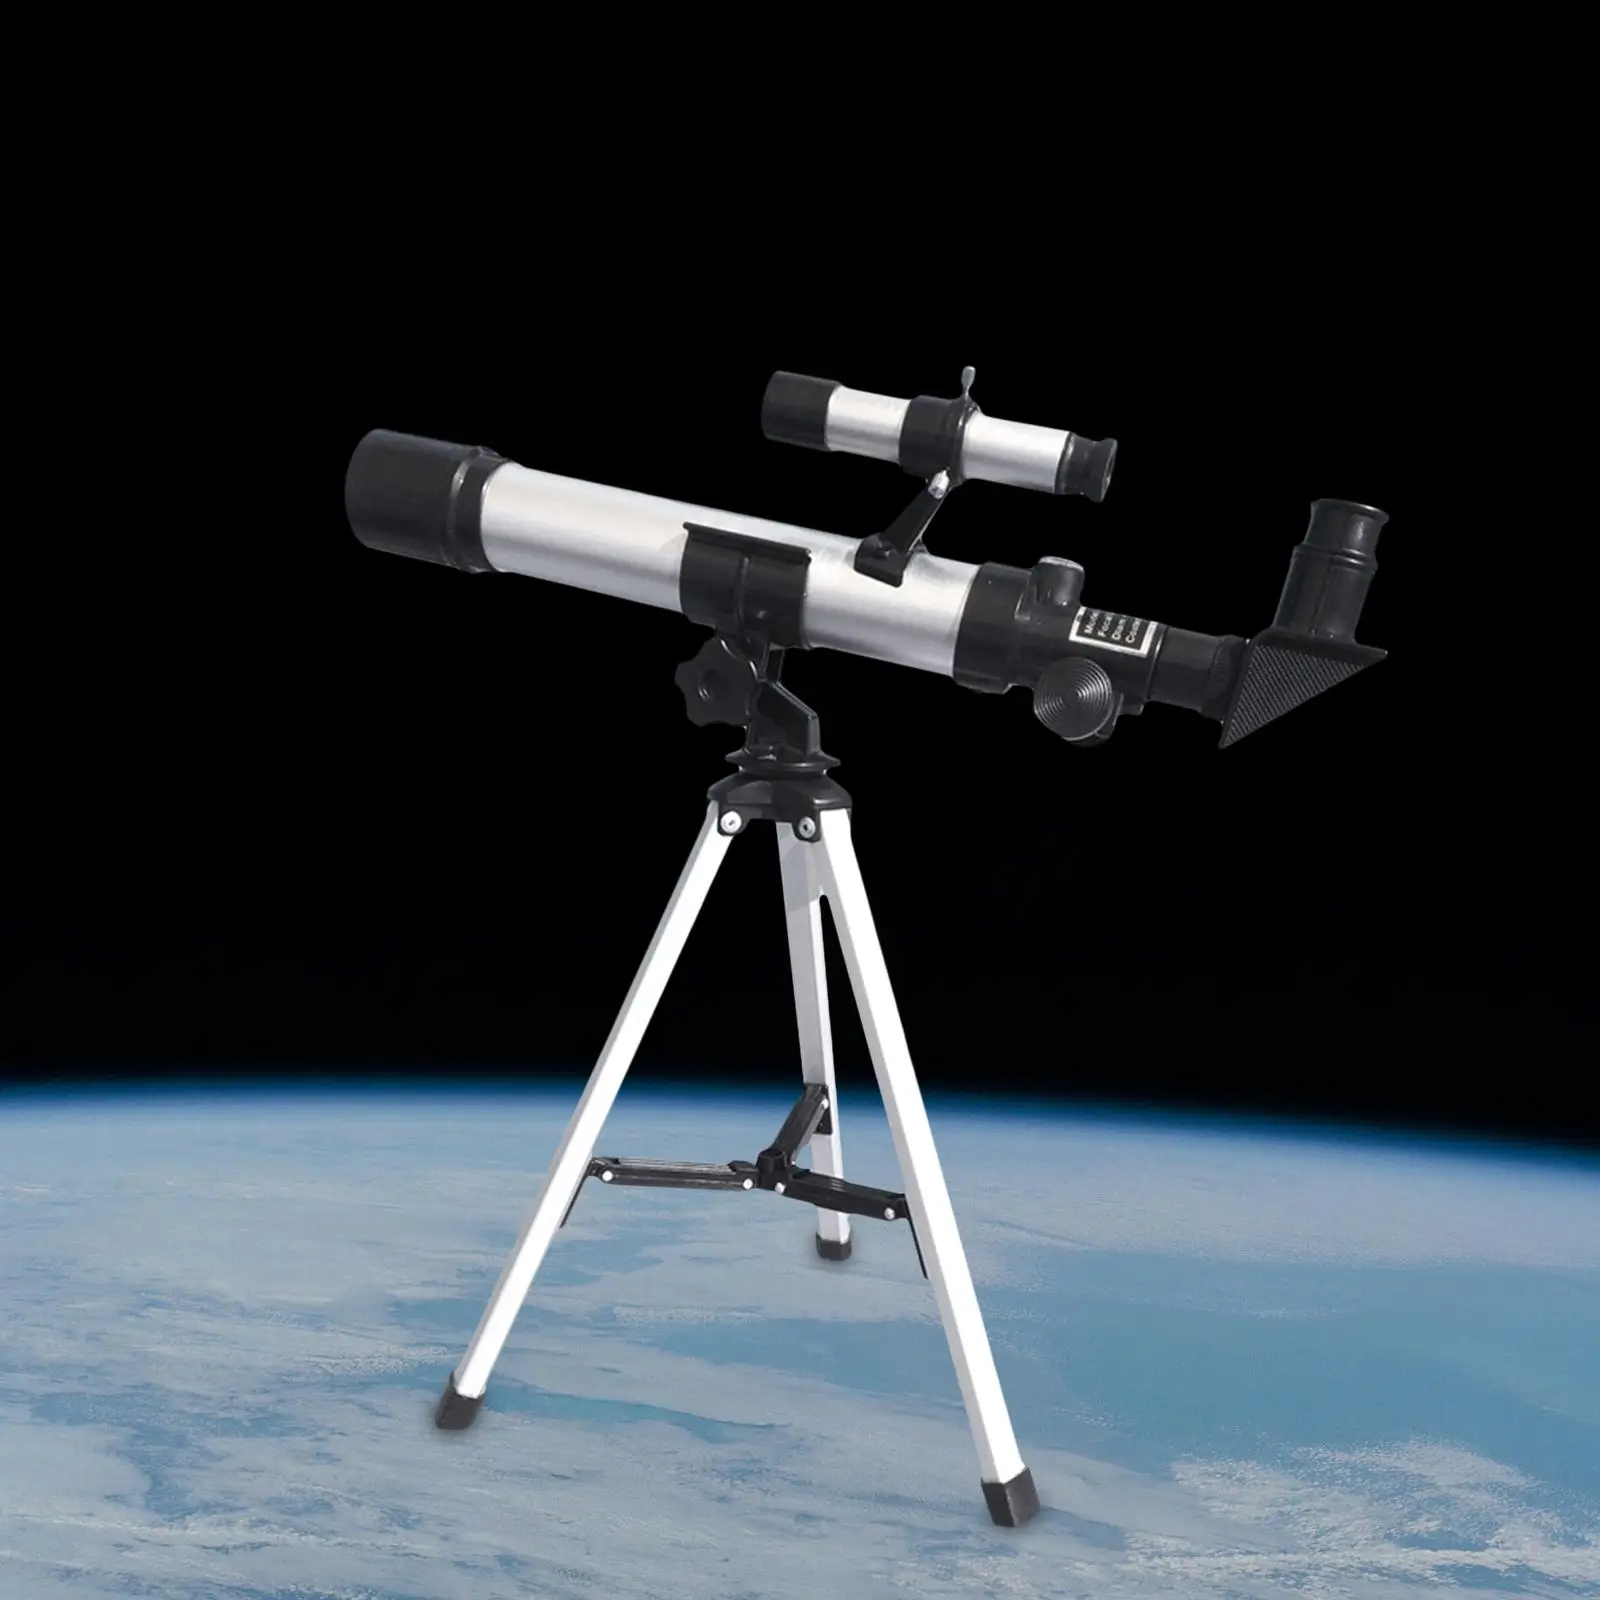 Professional Kids Astronomical Telescope with Tripod 1.5 40mm Objective Lens Refractor Telescope for Beginners Educational Toys